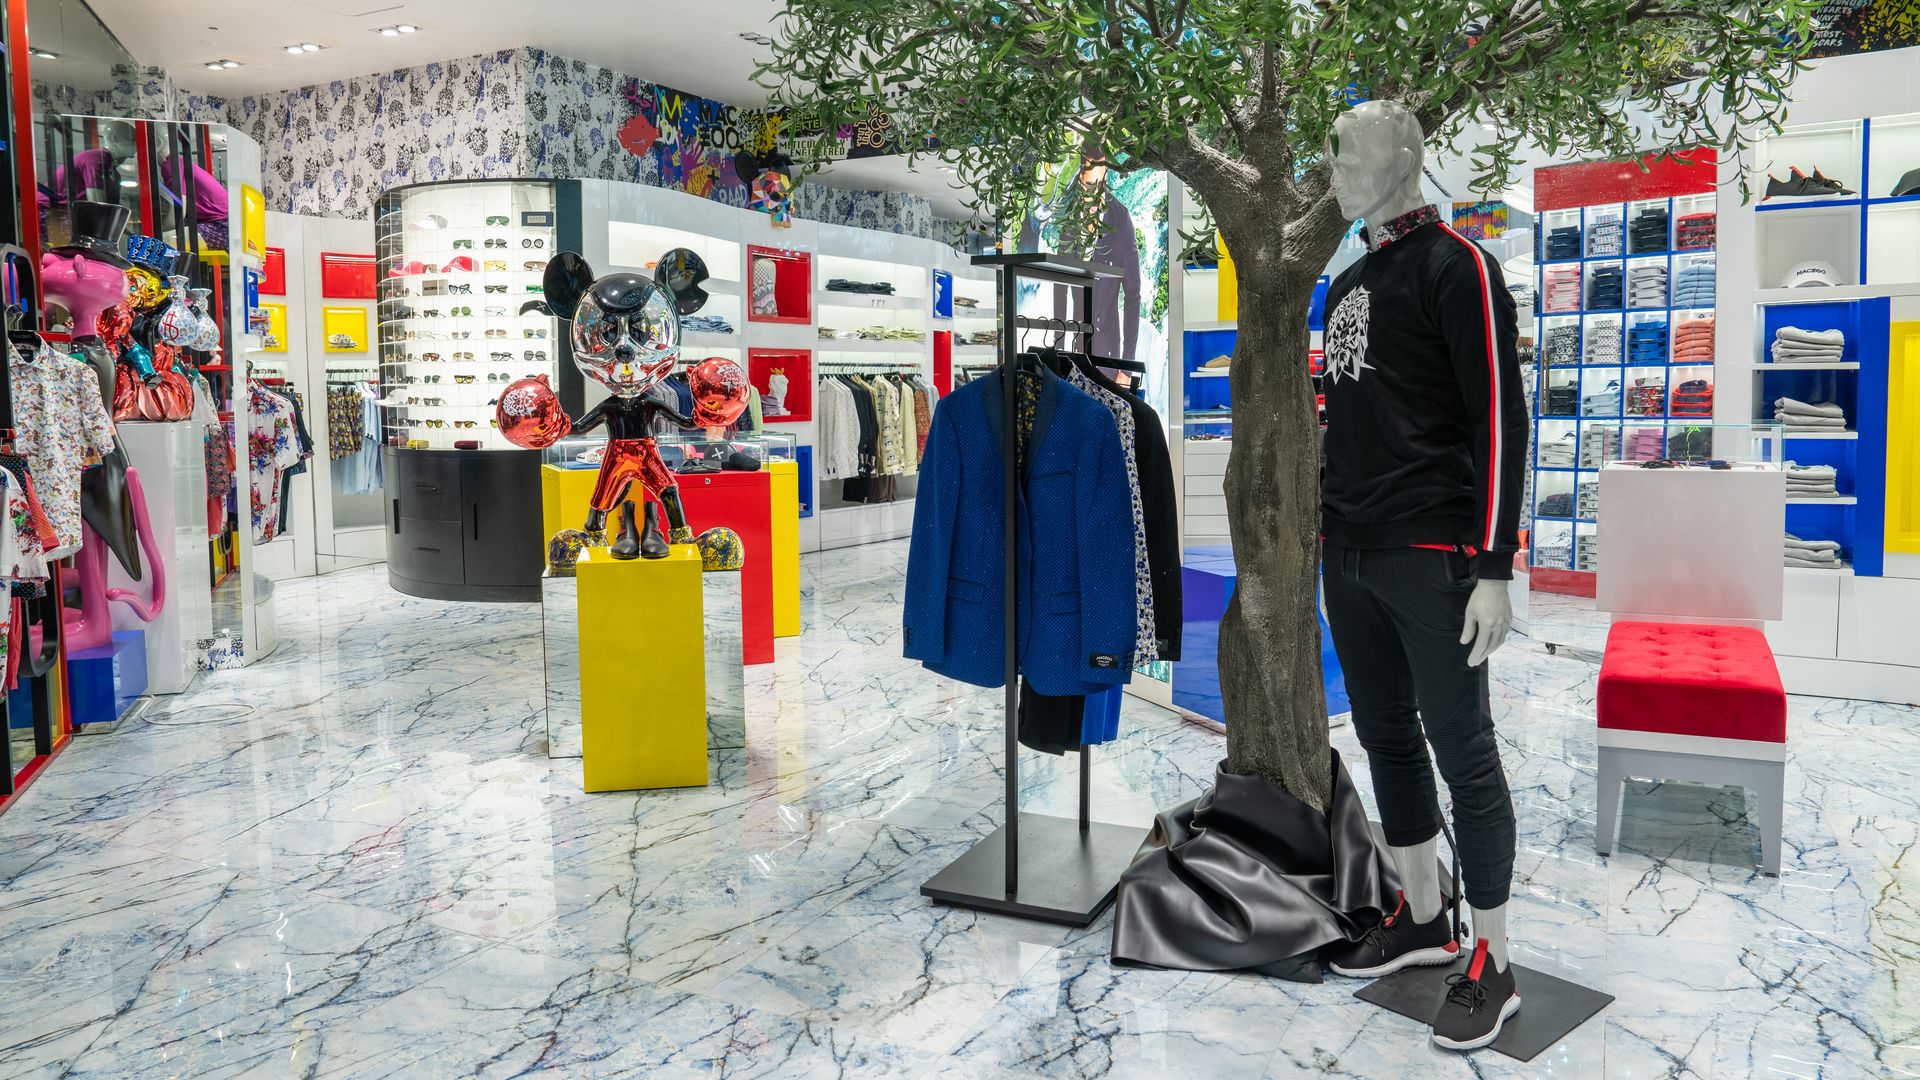 One of fashion brand Maceoo's stores features bright lighting and vivid colors to showcase its merchandise.